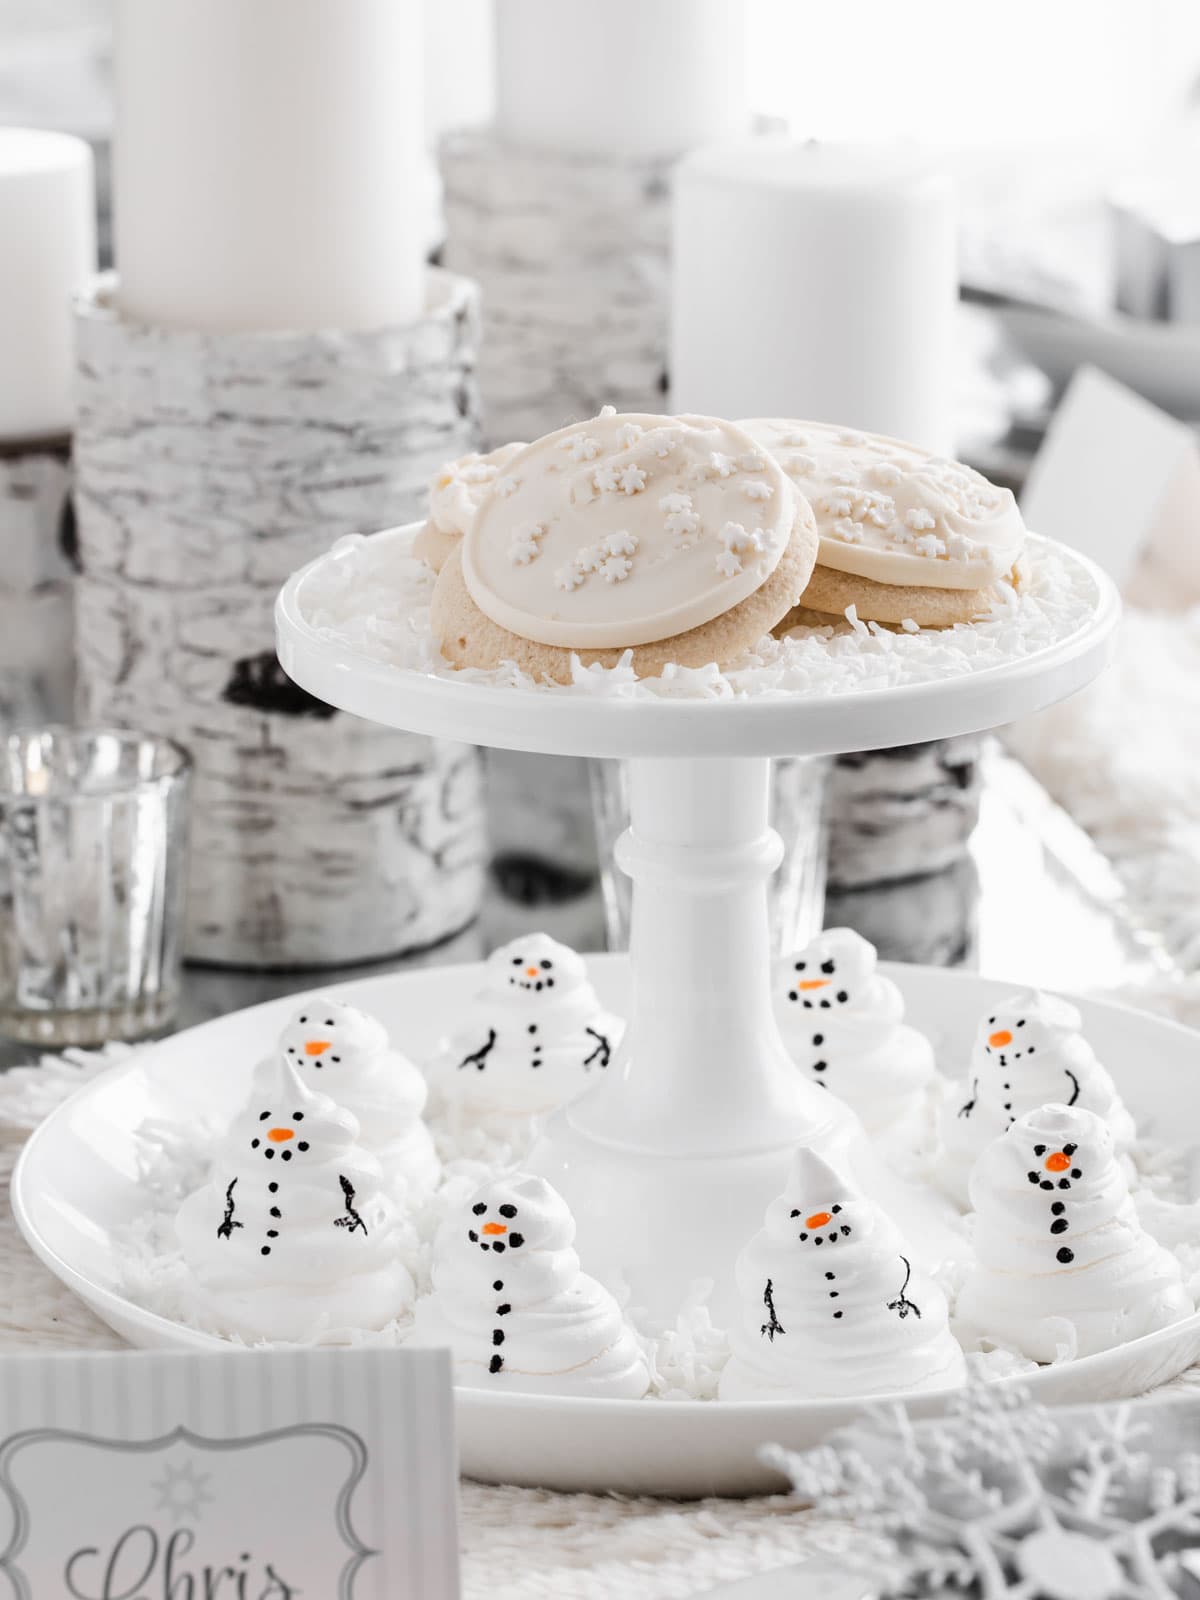 two-tiered server with cookies on top and snowman meringues on bottom.